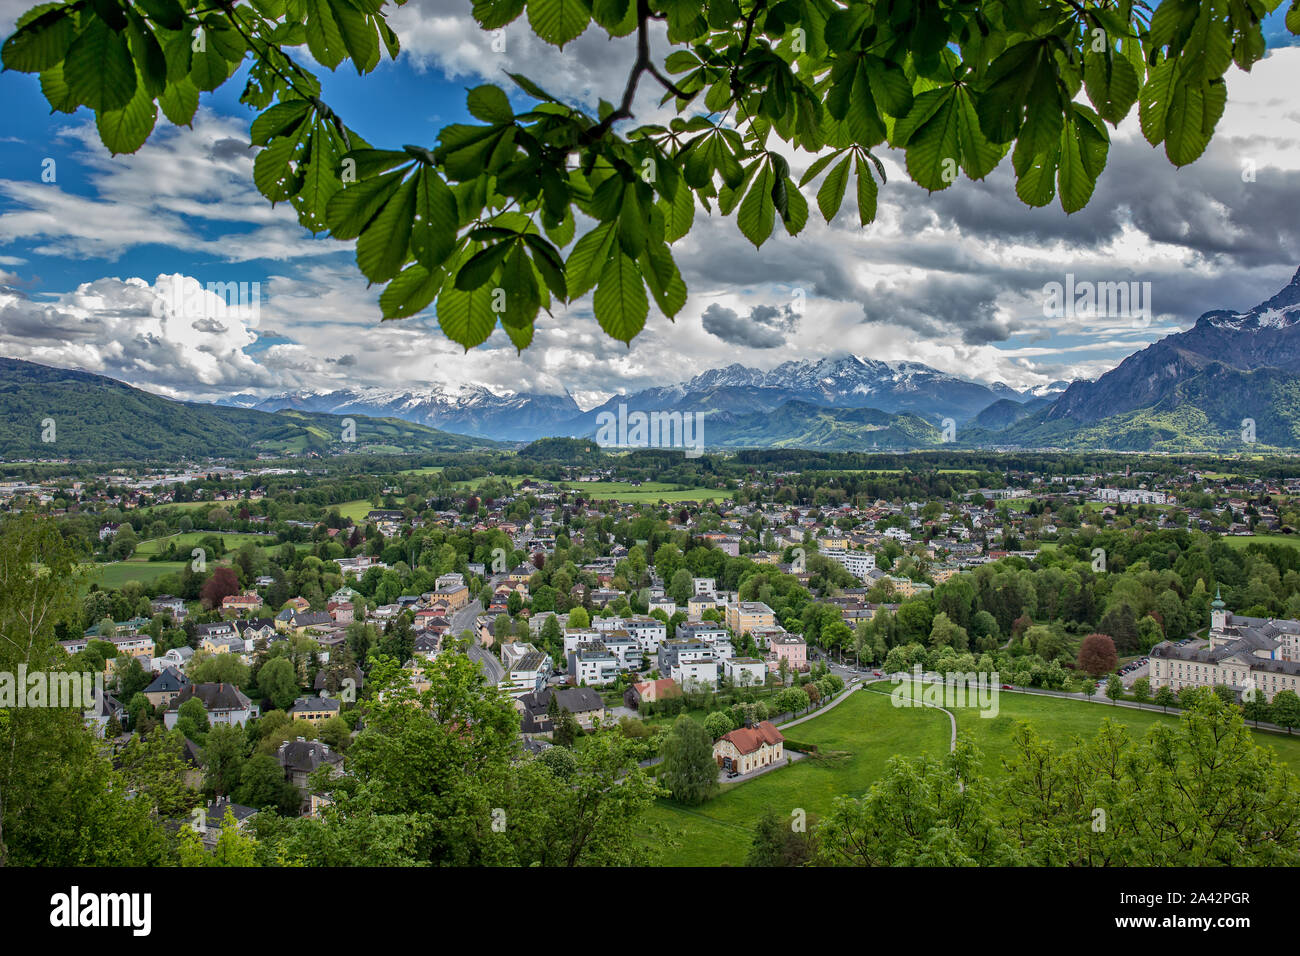 View from the fortress Hohensalzburg to the south side of Salzburg, showing the Nonntal and mountains of Hallein and Berchtesgaden in Austria, Germany Stock Photo